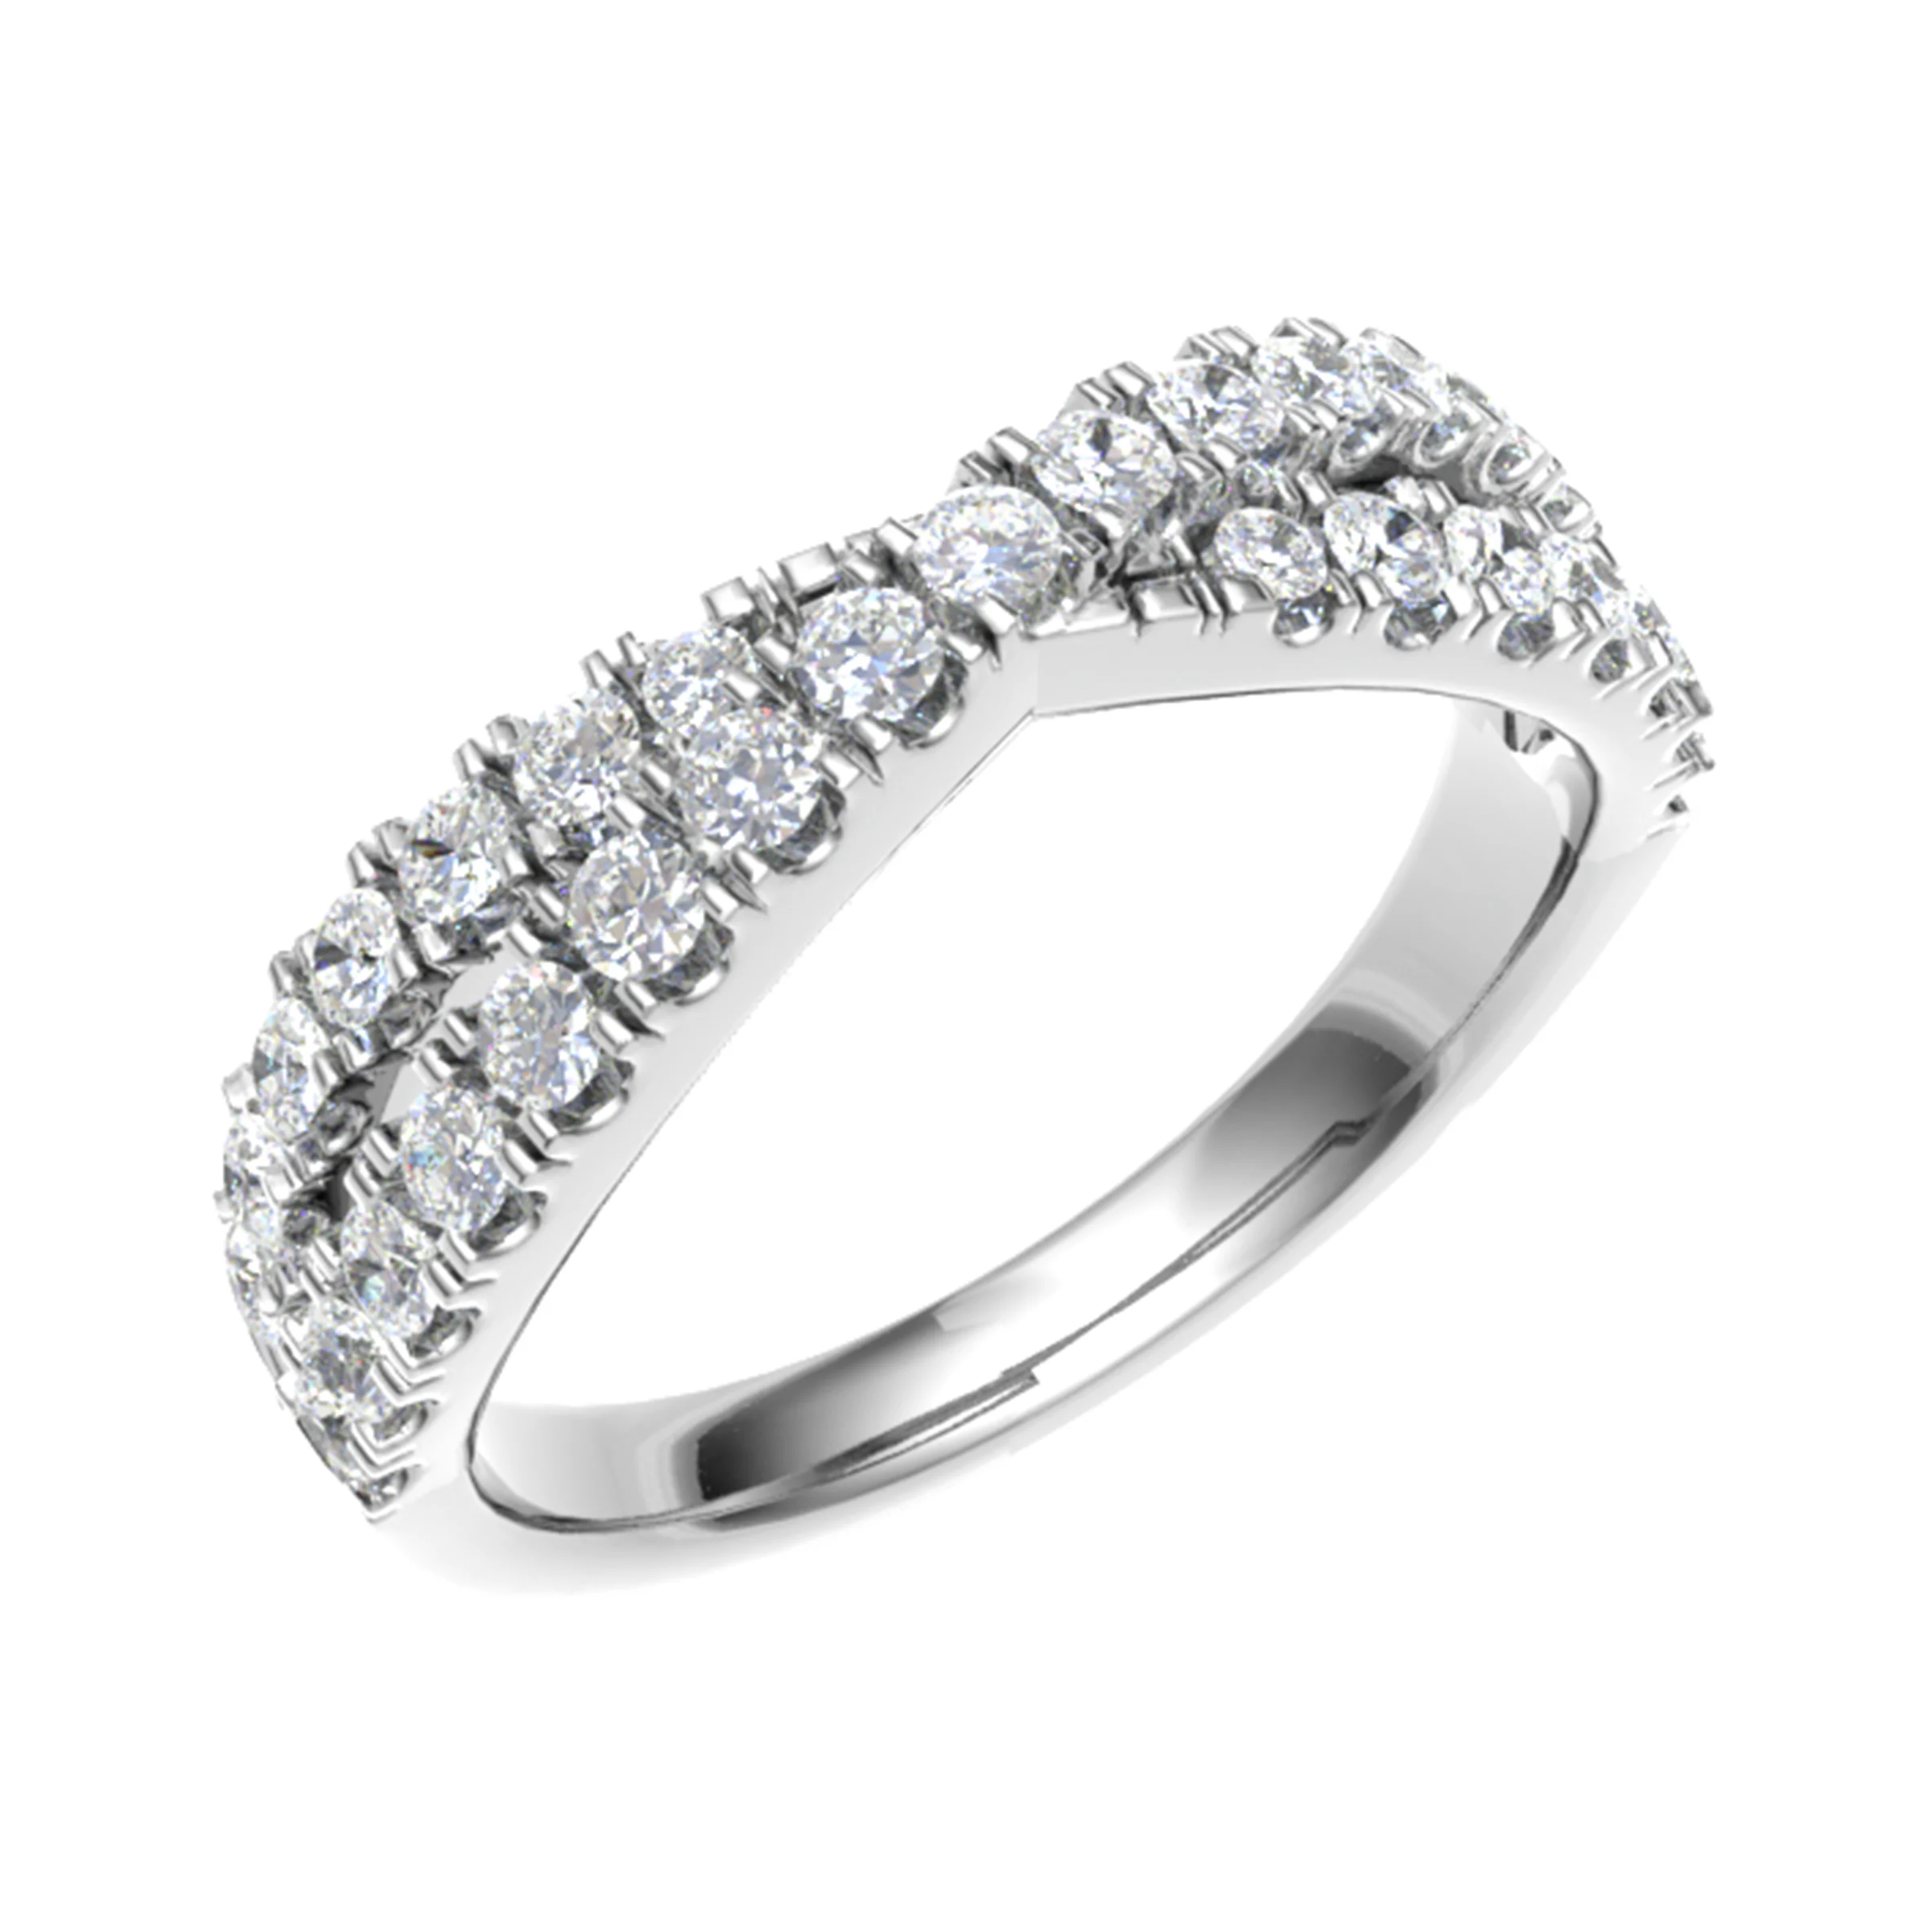 0.50 Carat Round Diamonds Twisted Half Eternity Ring with Micro Claw Set